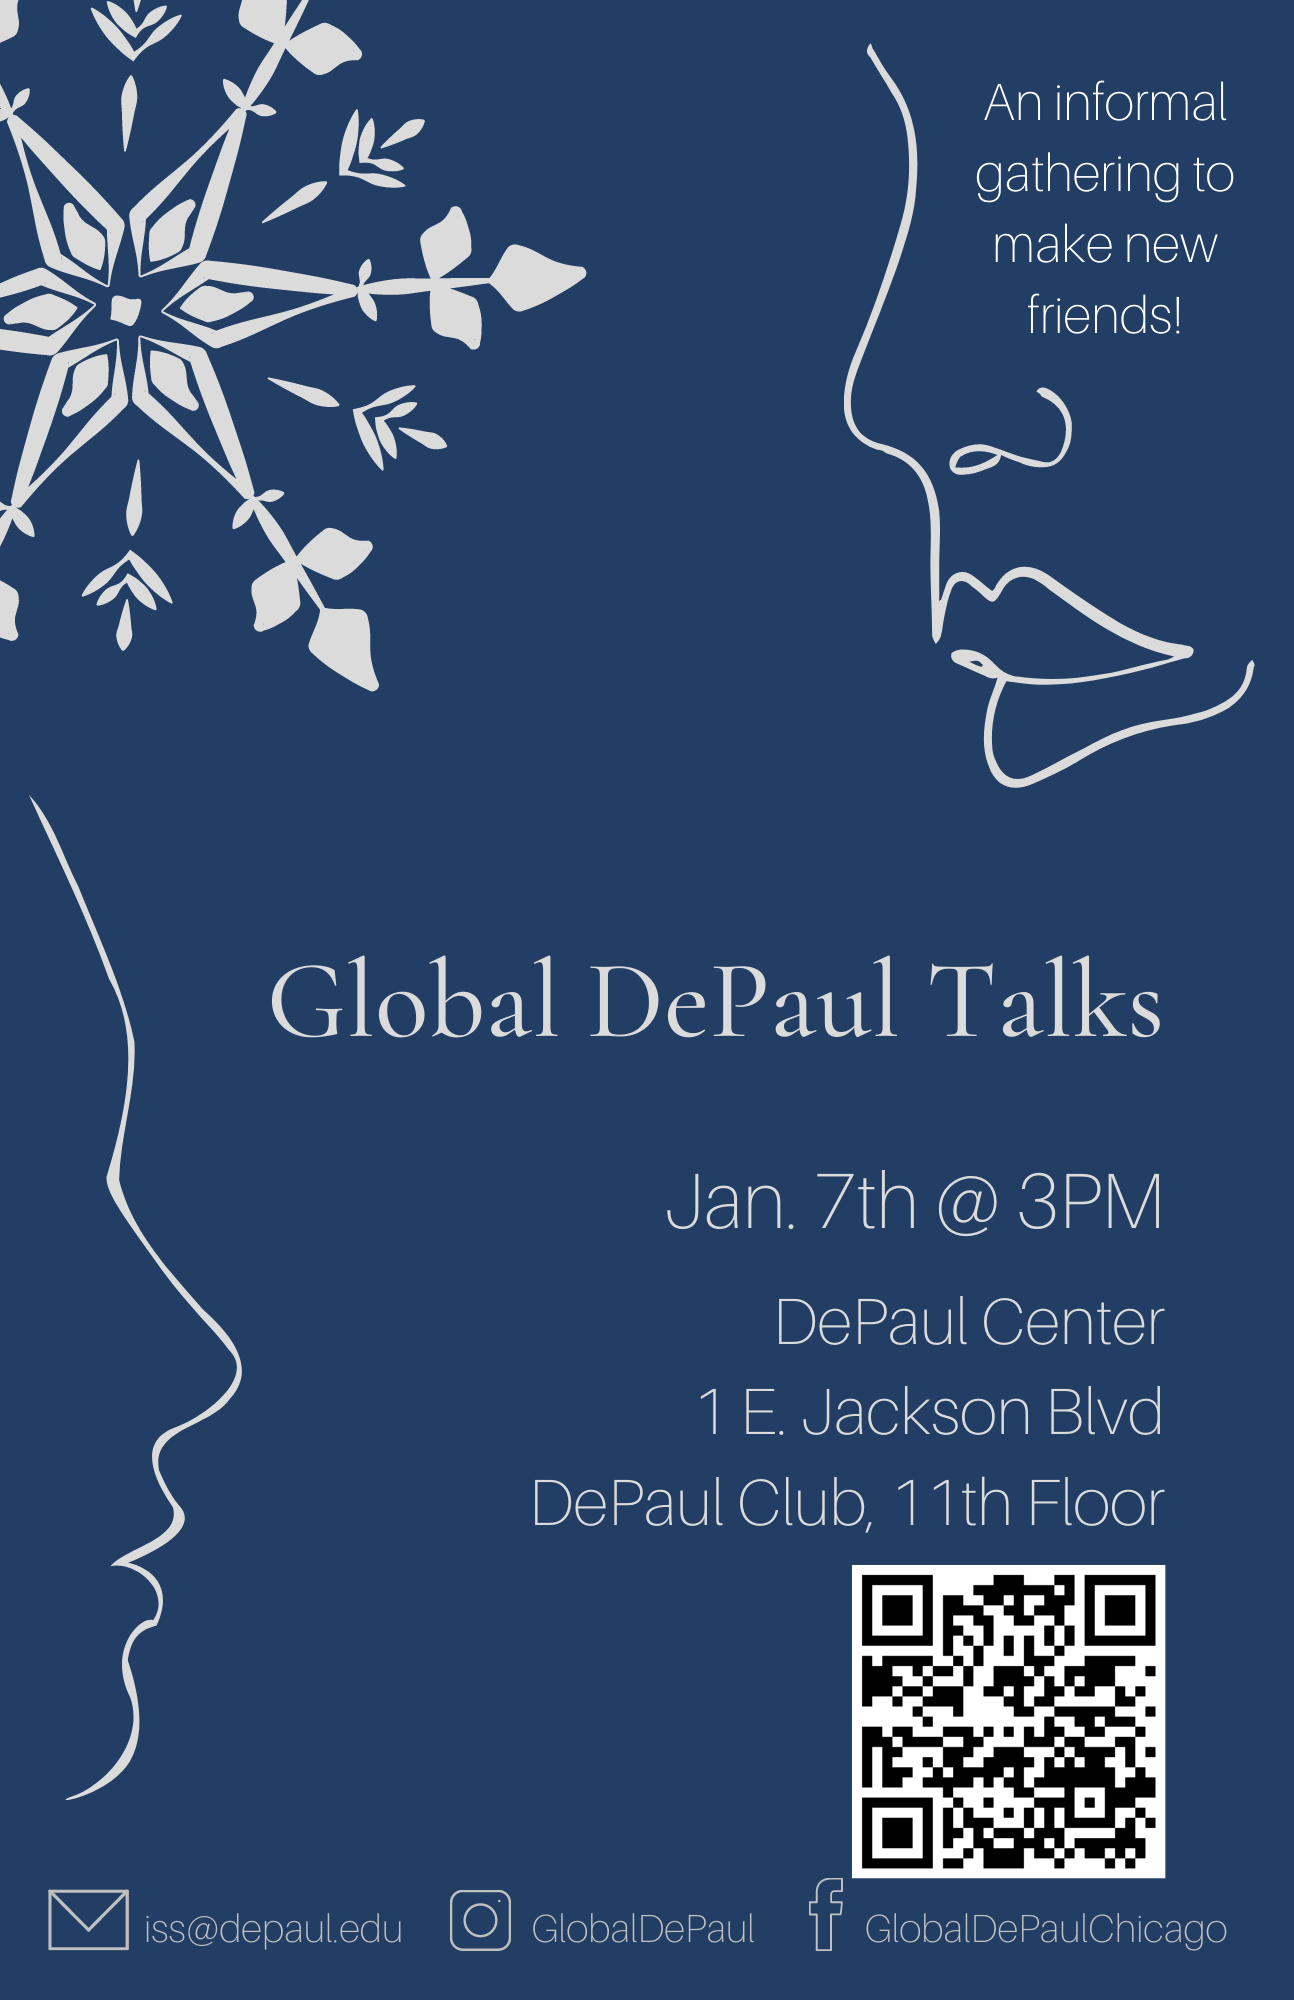 Join us for GlobalDepaulTalk on January 7th at 3PM